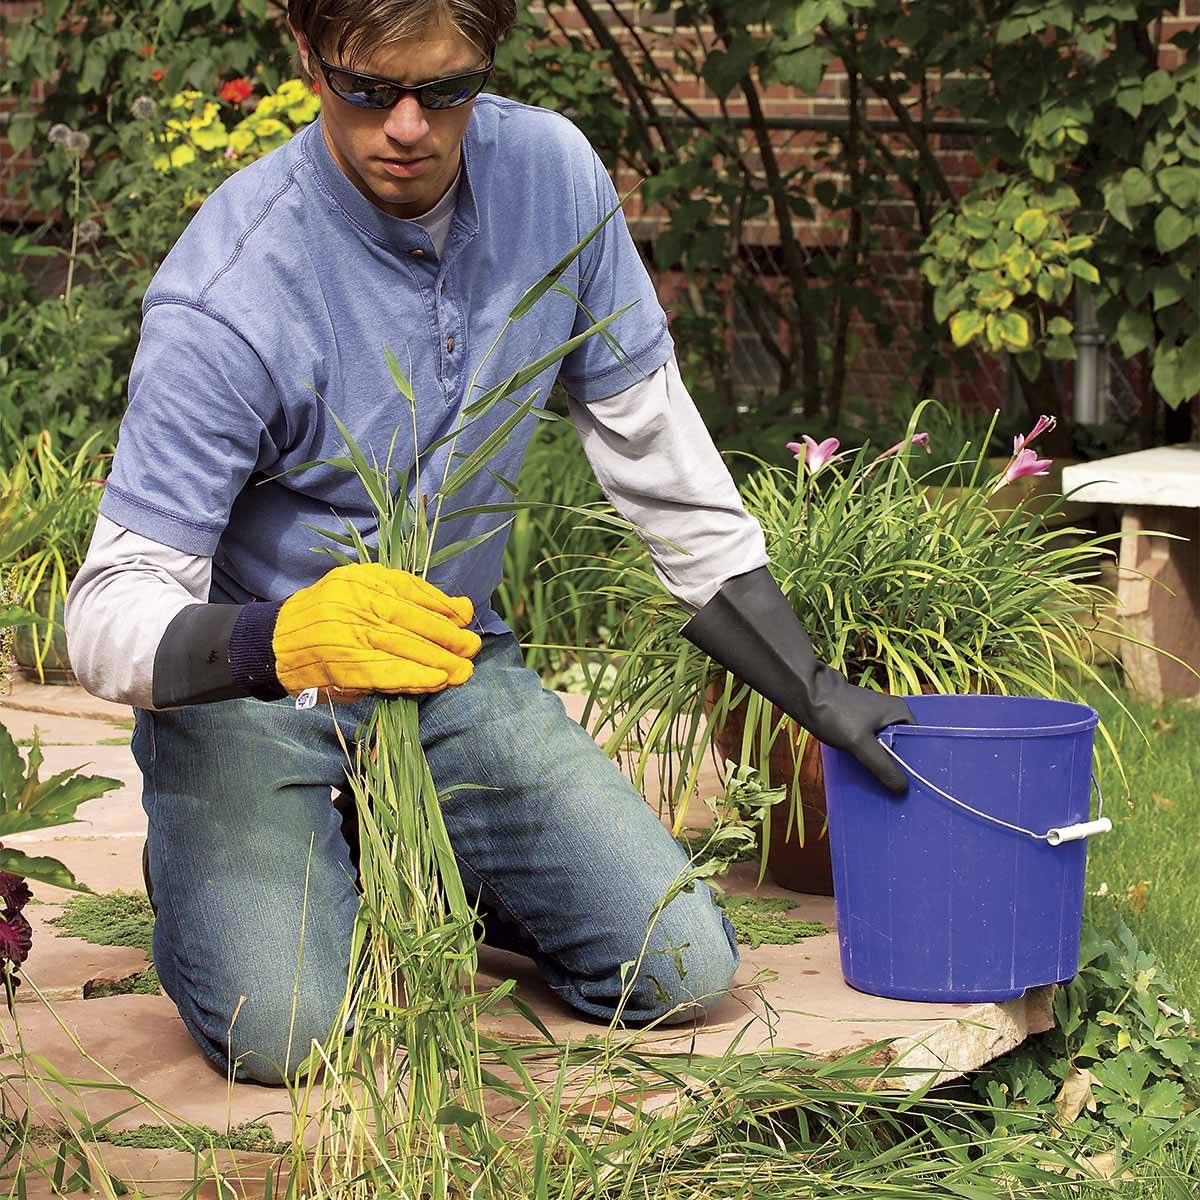 How to Kill Weeds with Vinegar the Right Way